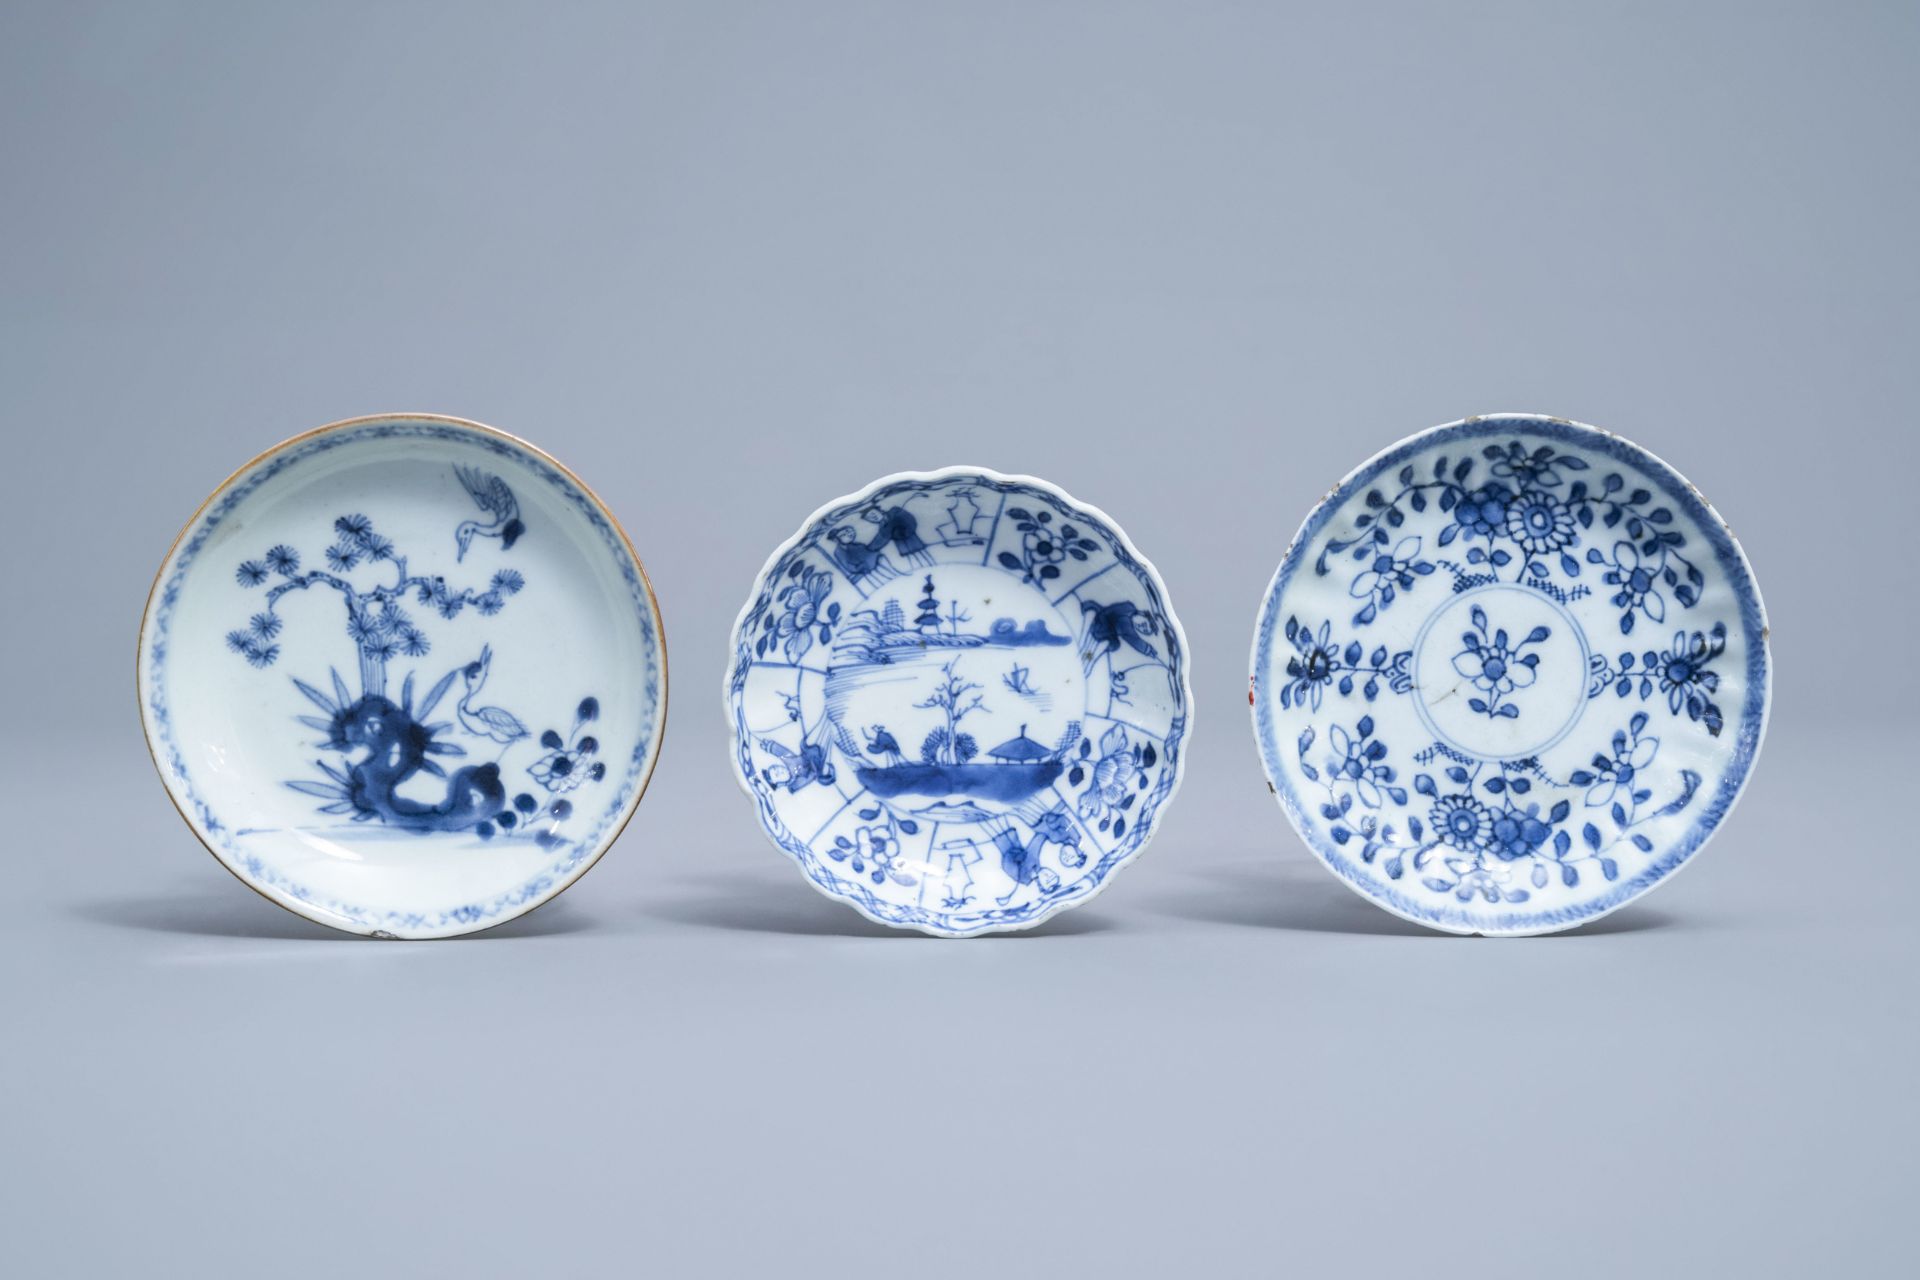 A varied collection of Chinese blue and white porcelain, 18th C. and later - Image 51 of 54